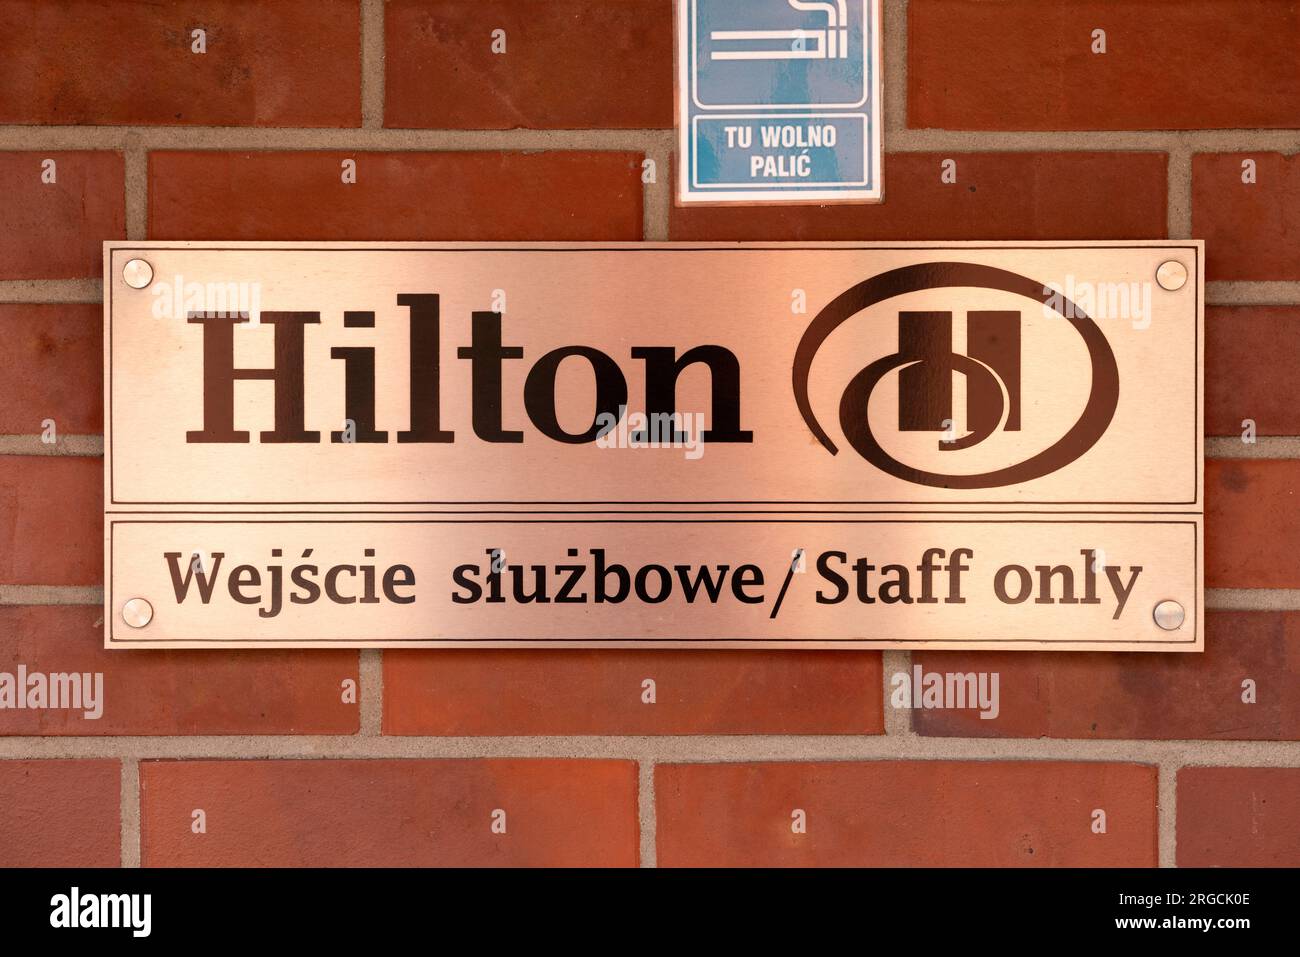 Hilton Hotel staff only bilingual sign in English and Polish in the Old Town of Gdansk, Poland, Europe, EU Stock Photo